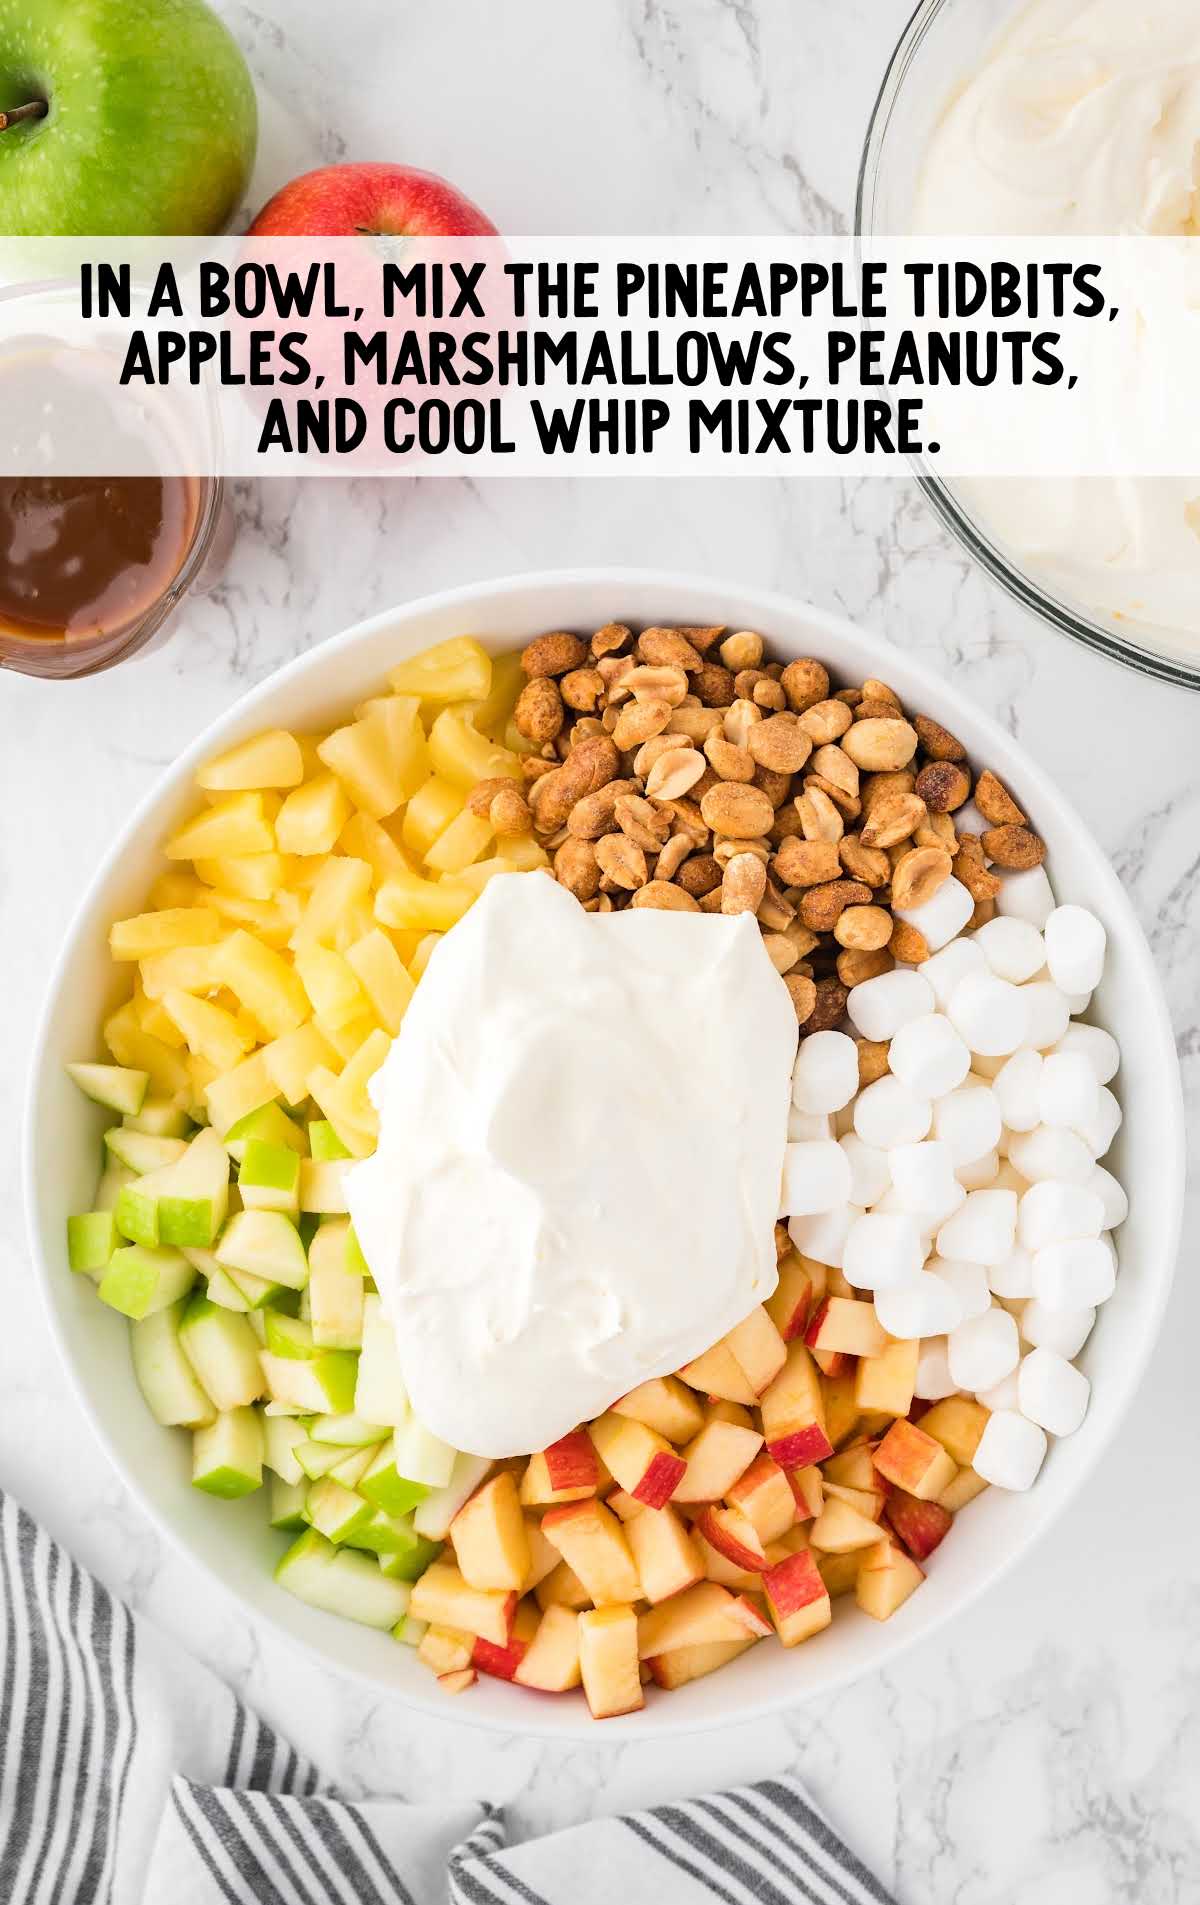 pineapple tidbits, apples, marshmallows, peanuts, and cool whip mixture mixed in a bowl